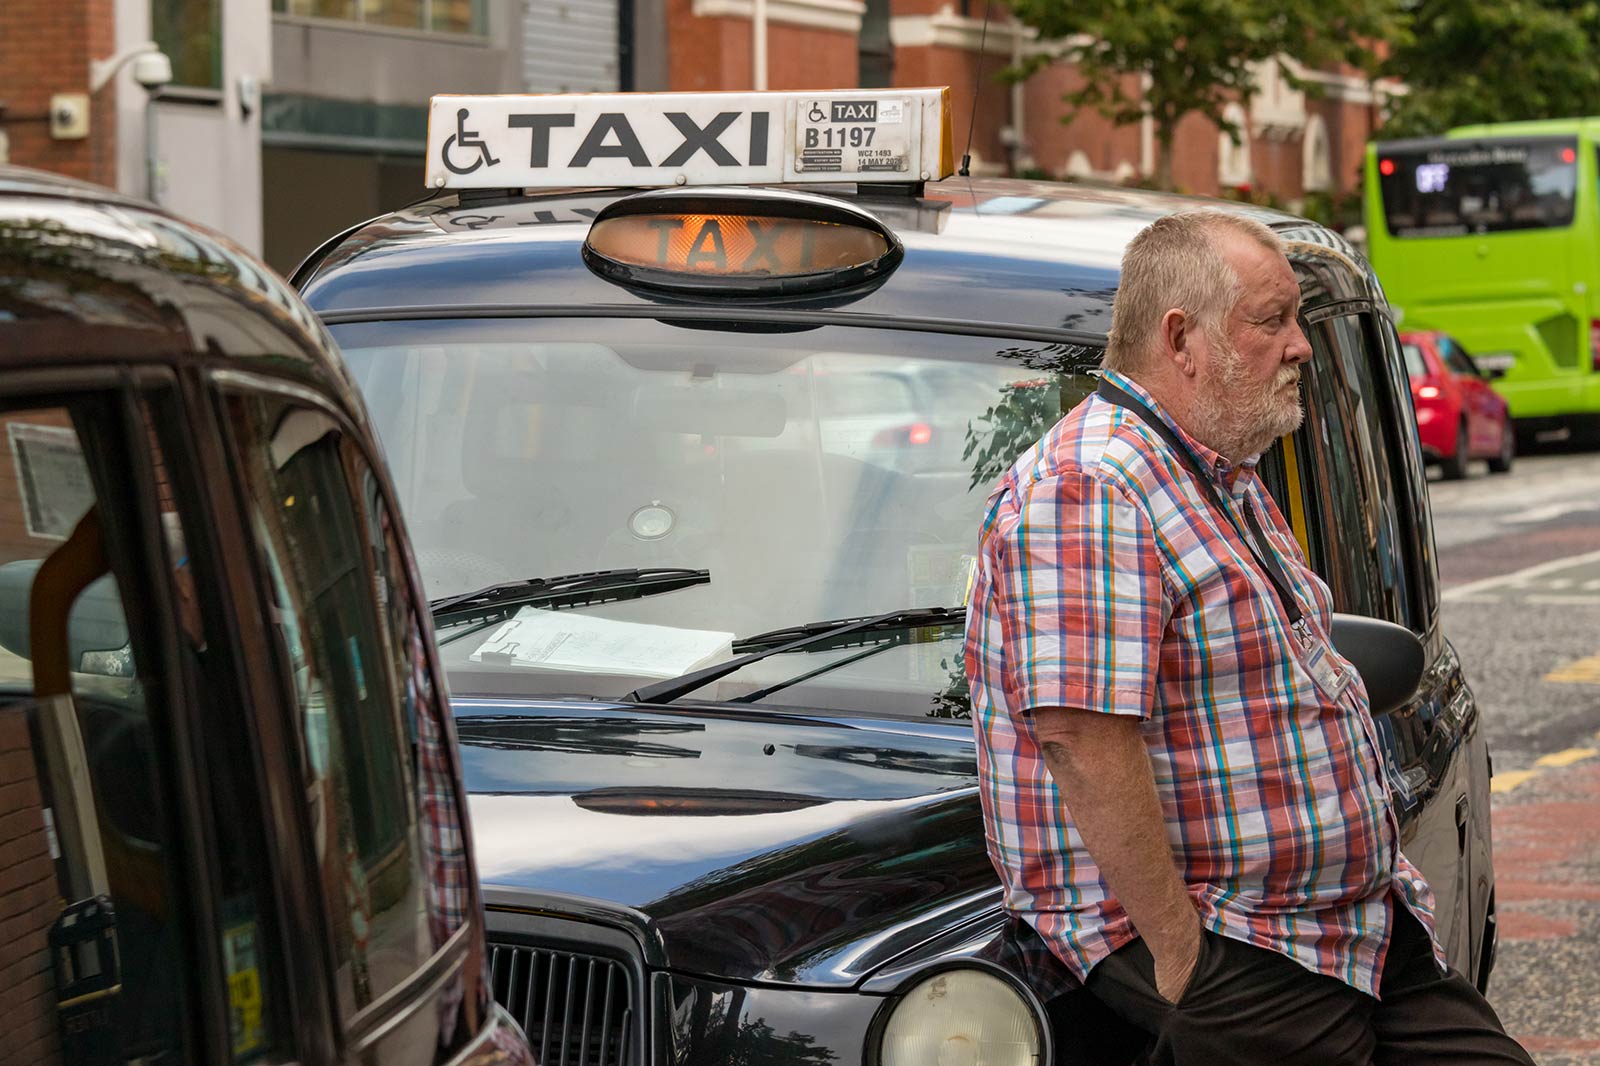 Taxi driver leaning on his taxi in Belfast, Northern Ireland. 24hrs itinerary for Belfast, drinks and petrol bombs